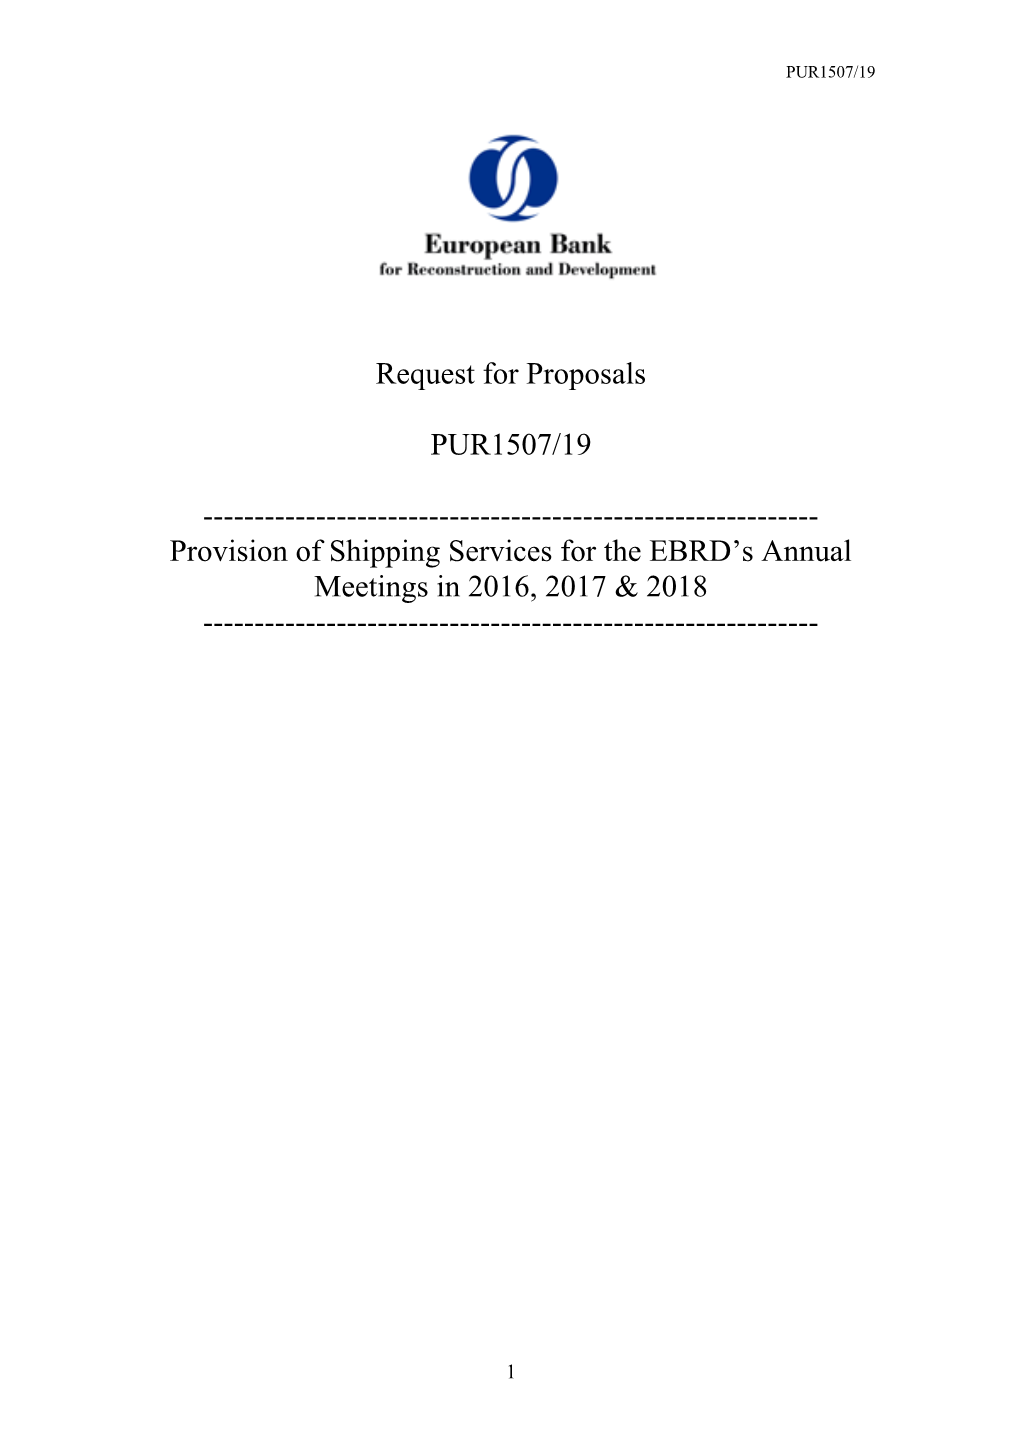 Provision of Shipping Services for the EBRD S Annual Meetings in 2016, 2017 & 2018